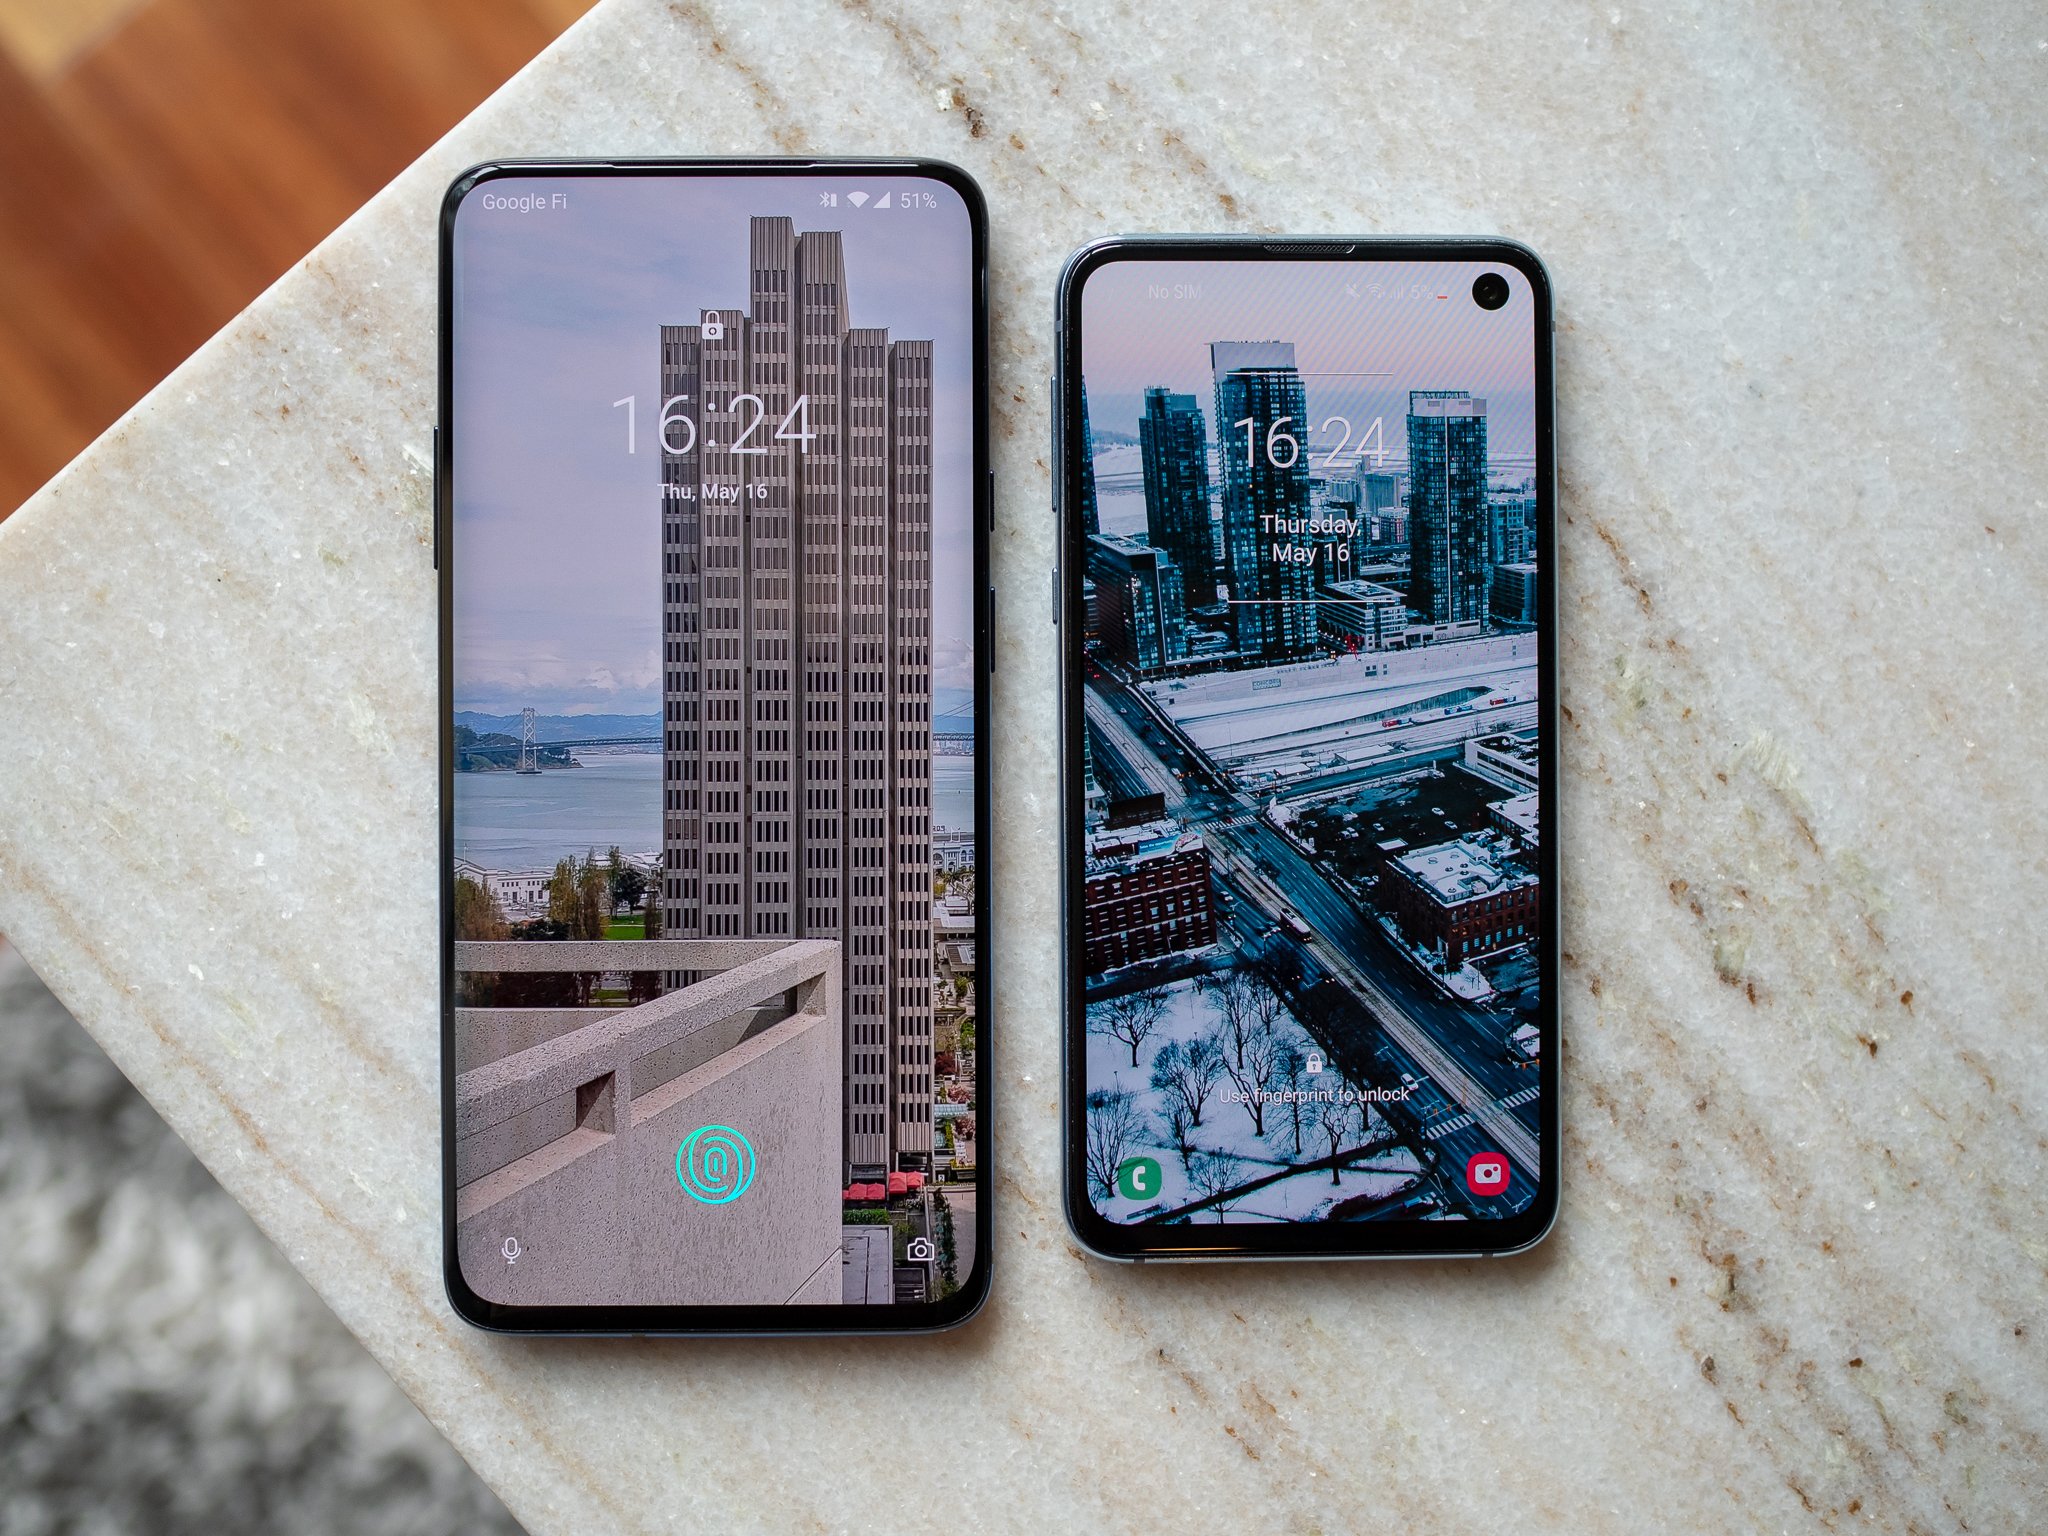 https://www.androidcentral.com/sites/androidcentral.com/files/styles/large_wm_brw/public/article_images/2019/05/oneplus-7-pro-vs-galaxy-s10e-4.jpg?itok=4tBXTrf7